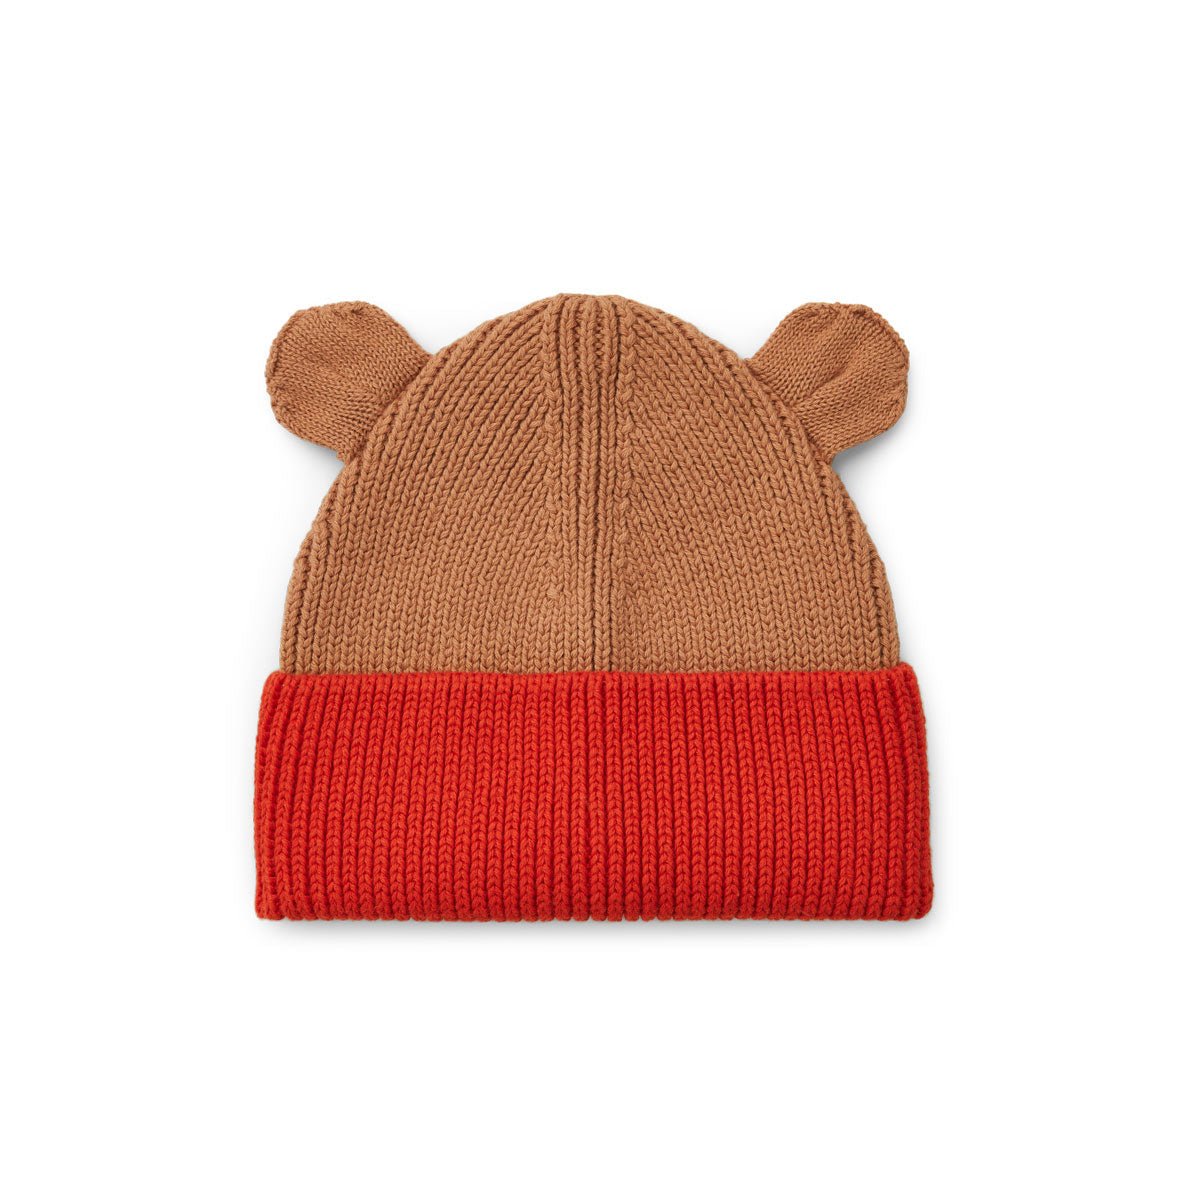 Liewood, Gina Beanie, Apple Red/Tuscany Rose Mix, Children’s hat, baby hat, winter hat, Nottinghamshire stockist, independent Nottinghamshire children’s store